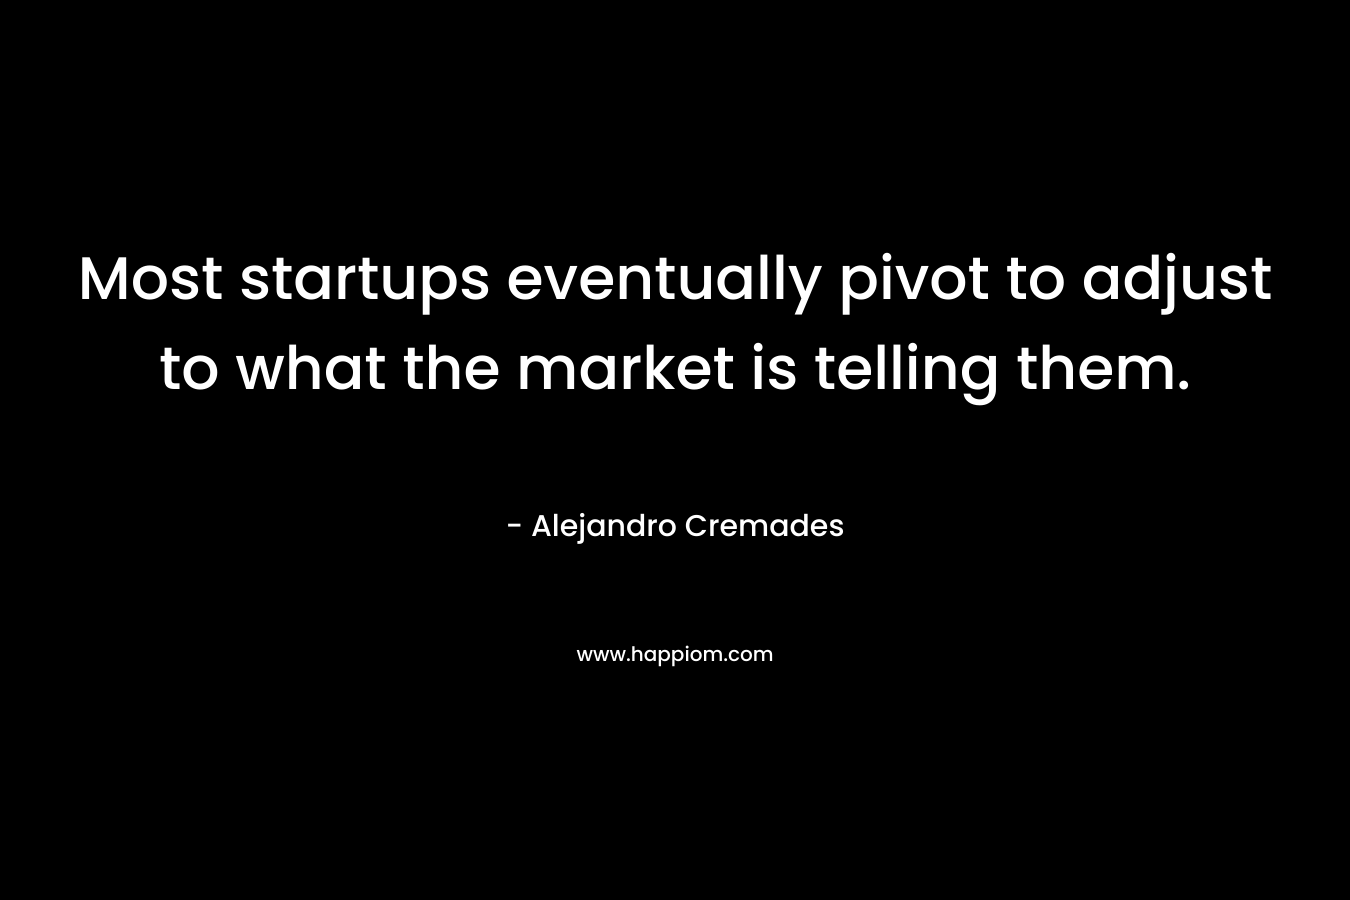 Most startups eventually pivot to adjust to what the market is telling them. – Alejandro Cremades